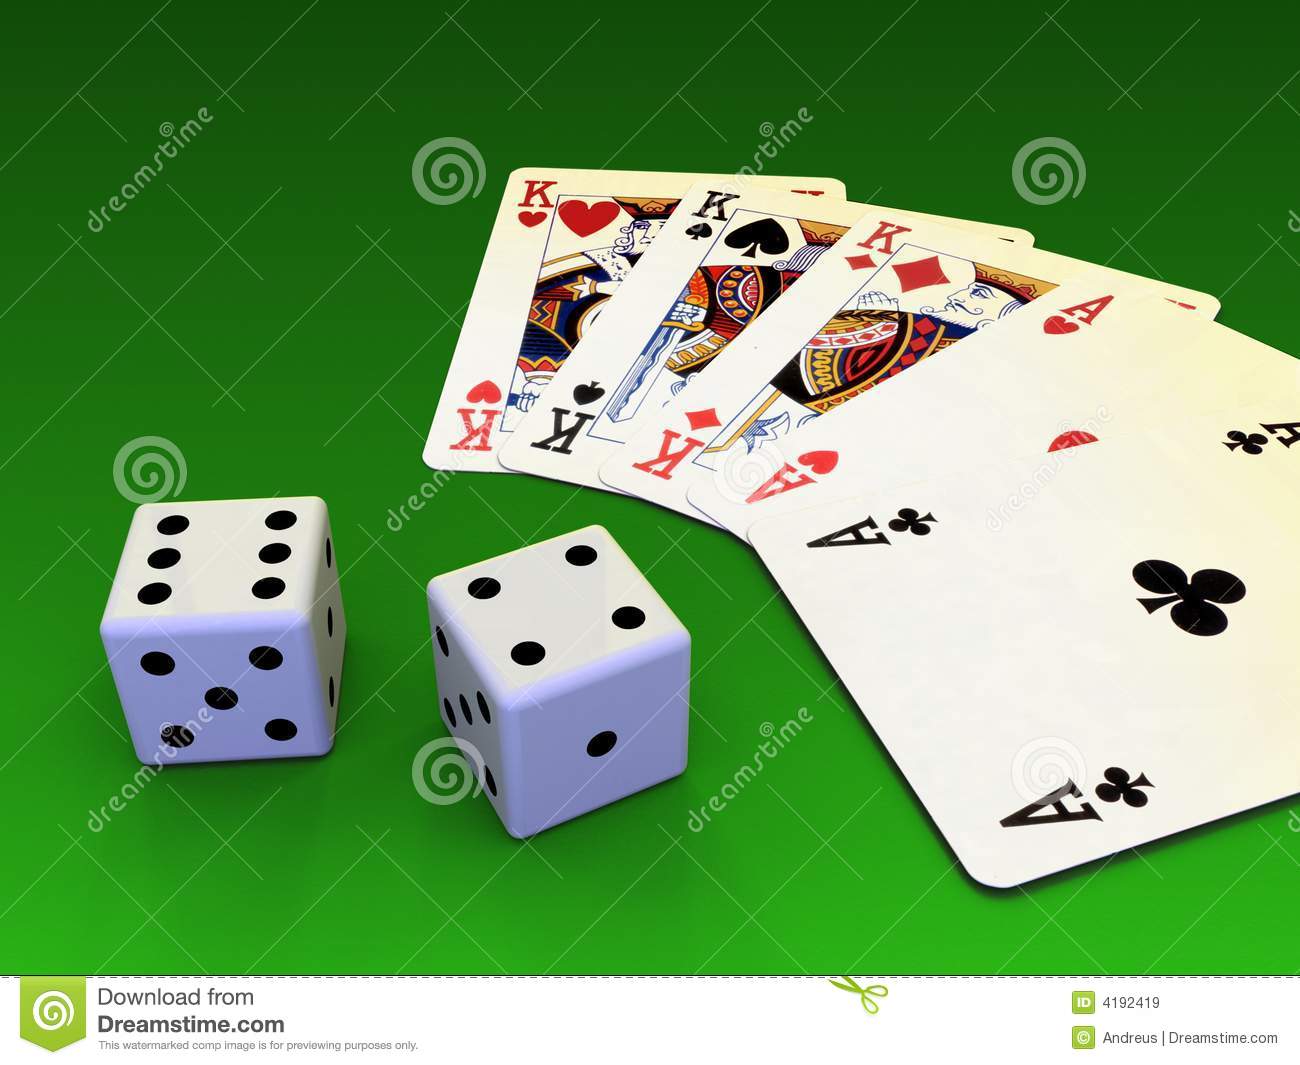 Dices And Cards On Felt Table  Digital Illustration